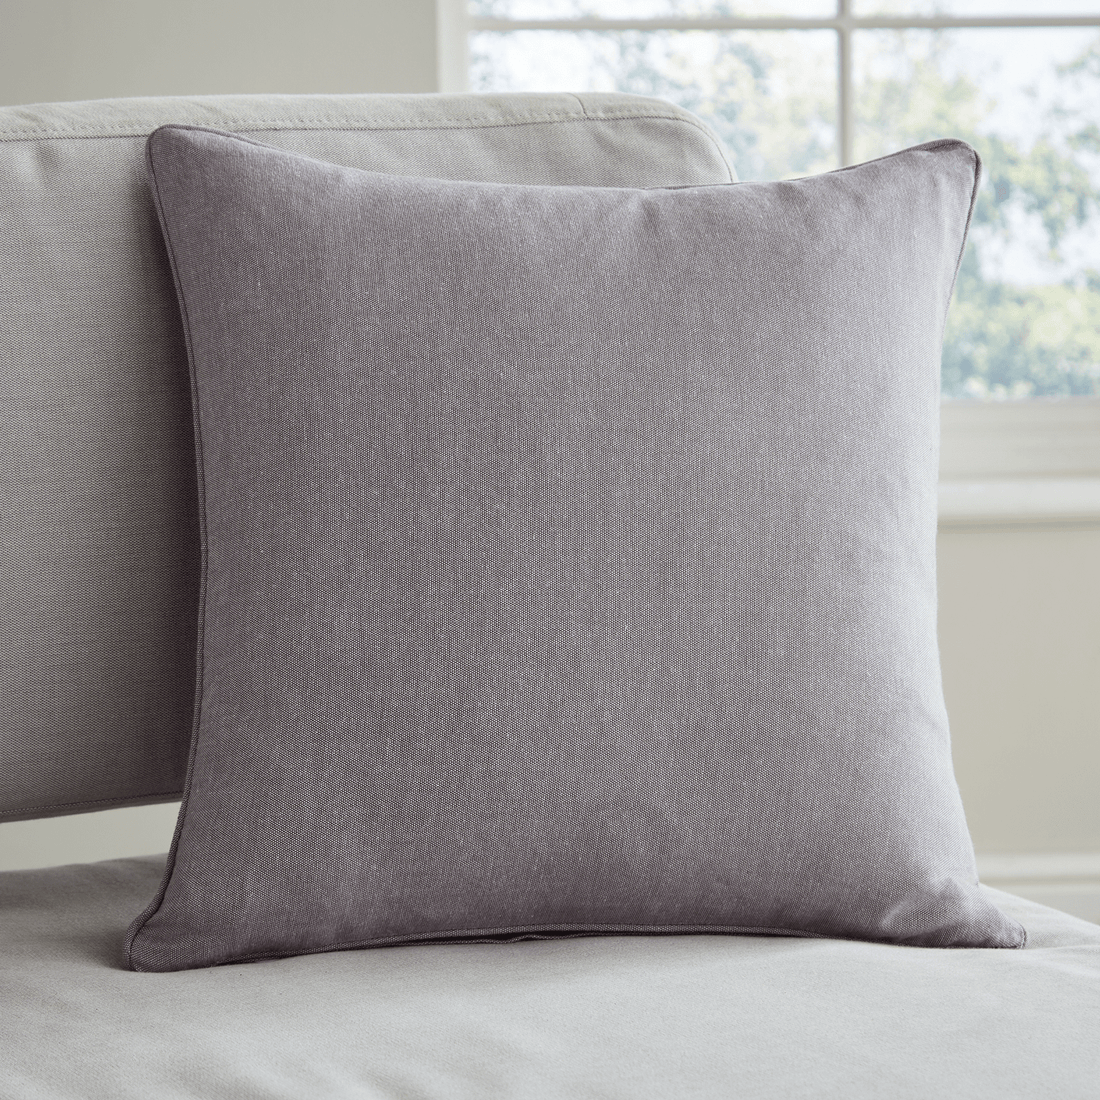 Catherine Lansfield Yarn Dyed 100% Cotton Chambray Cushion Cover - Grey 1 Shaws Department Stores